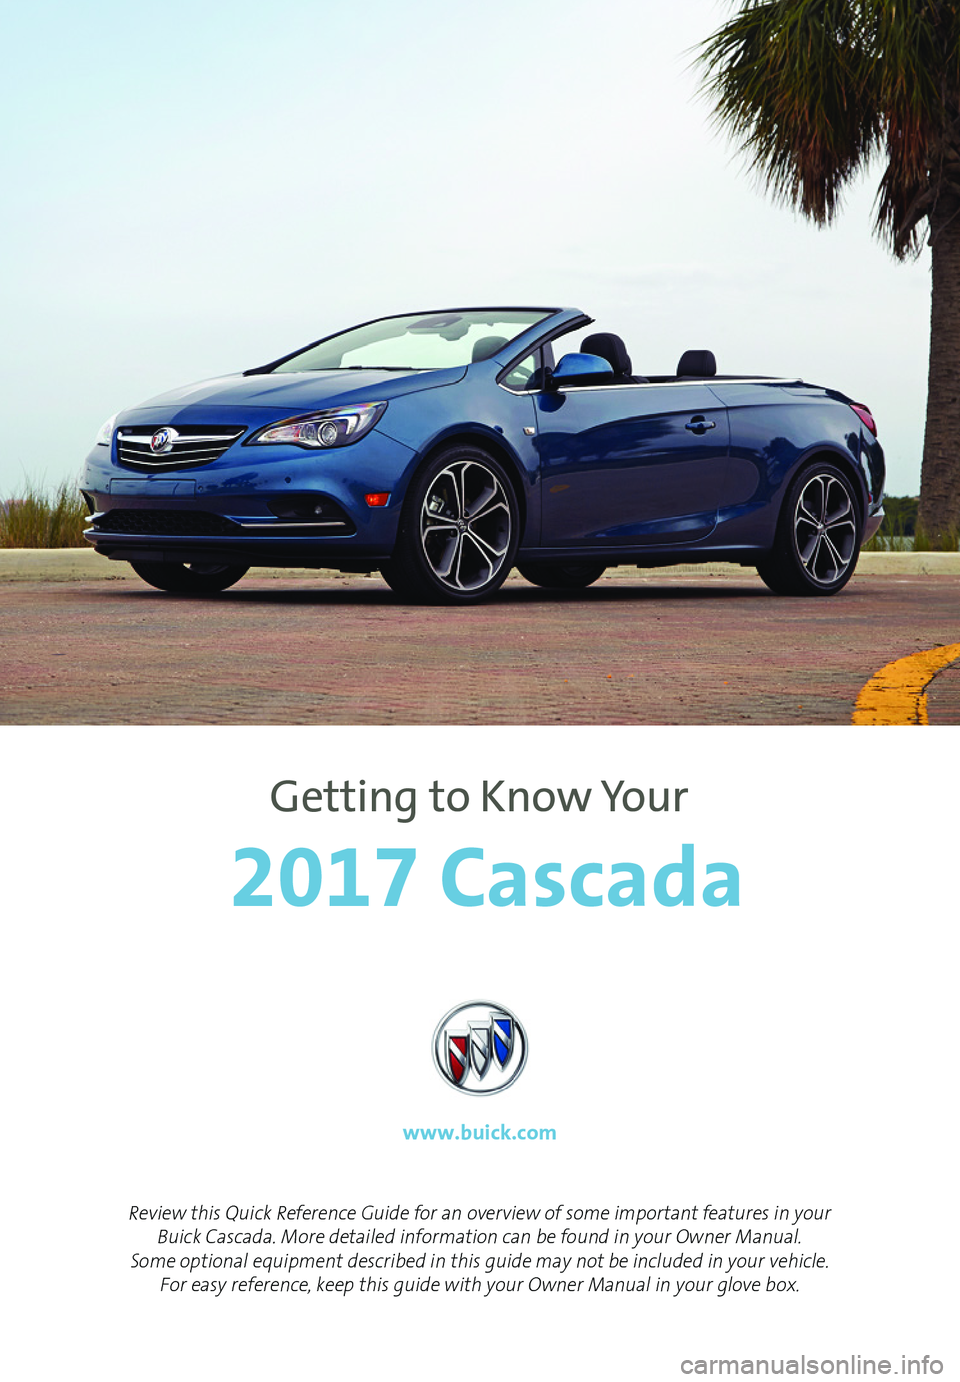 BUICK CASCADA 2017  Get To Know Guide 1
Review this Quick Reference Guide for an overview of some important features in your Buick Cascada. More detailed information can be found in your Owner Manual.  Some optional equipment described in